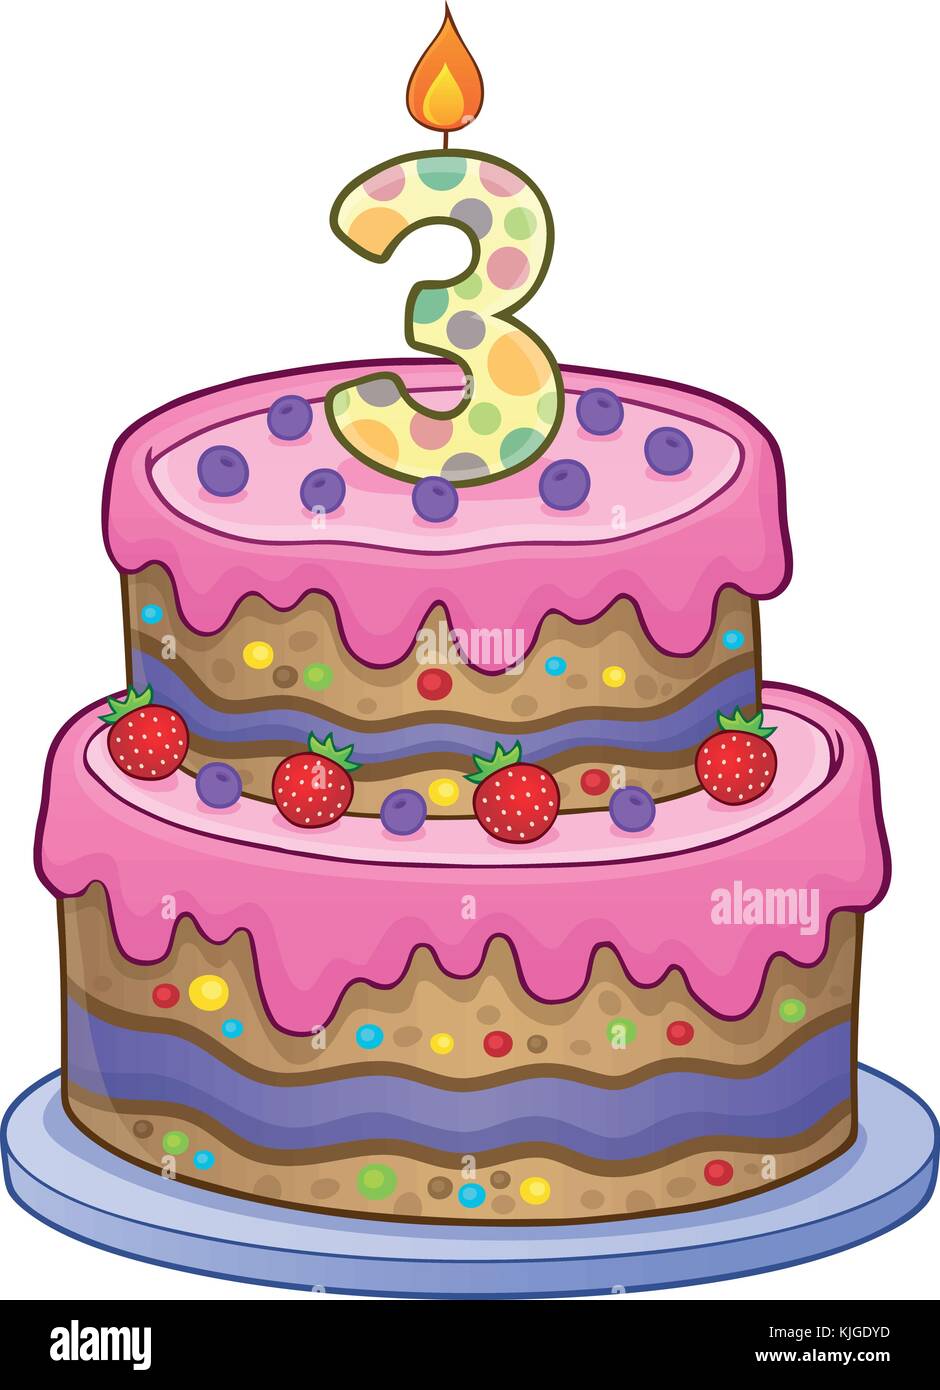 Birthday Cake Image For 3 Years Old Eps10 Vector Illustration Stock Vector Image Art Alamy